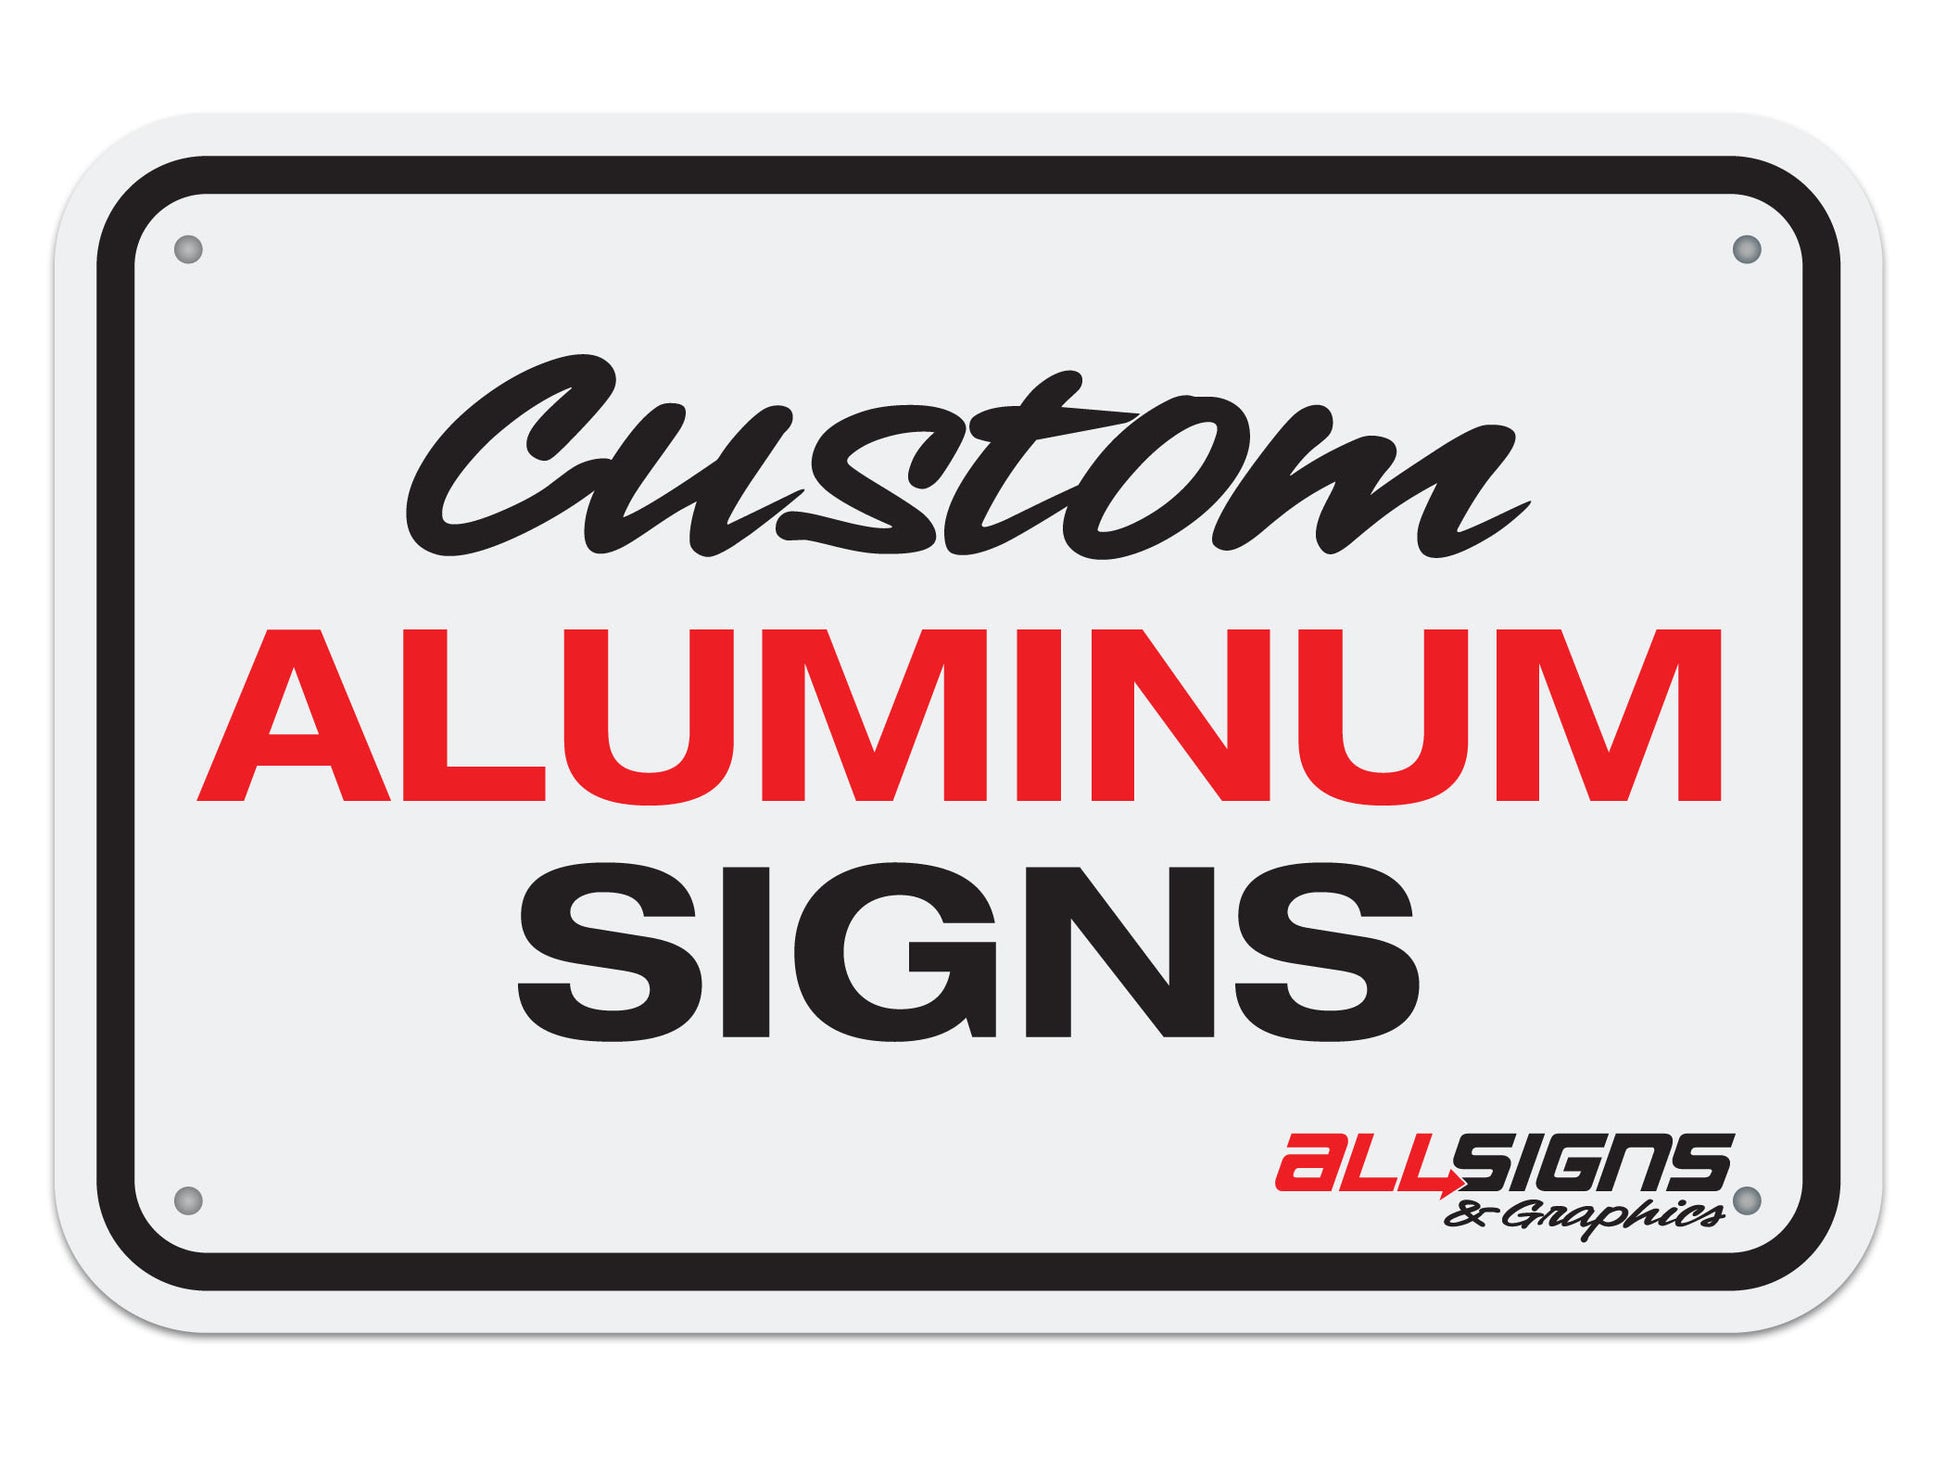 Reflective Lettering  Reflective Decals - Square Signs